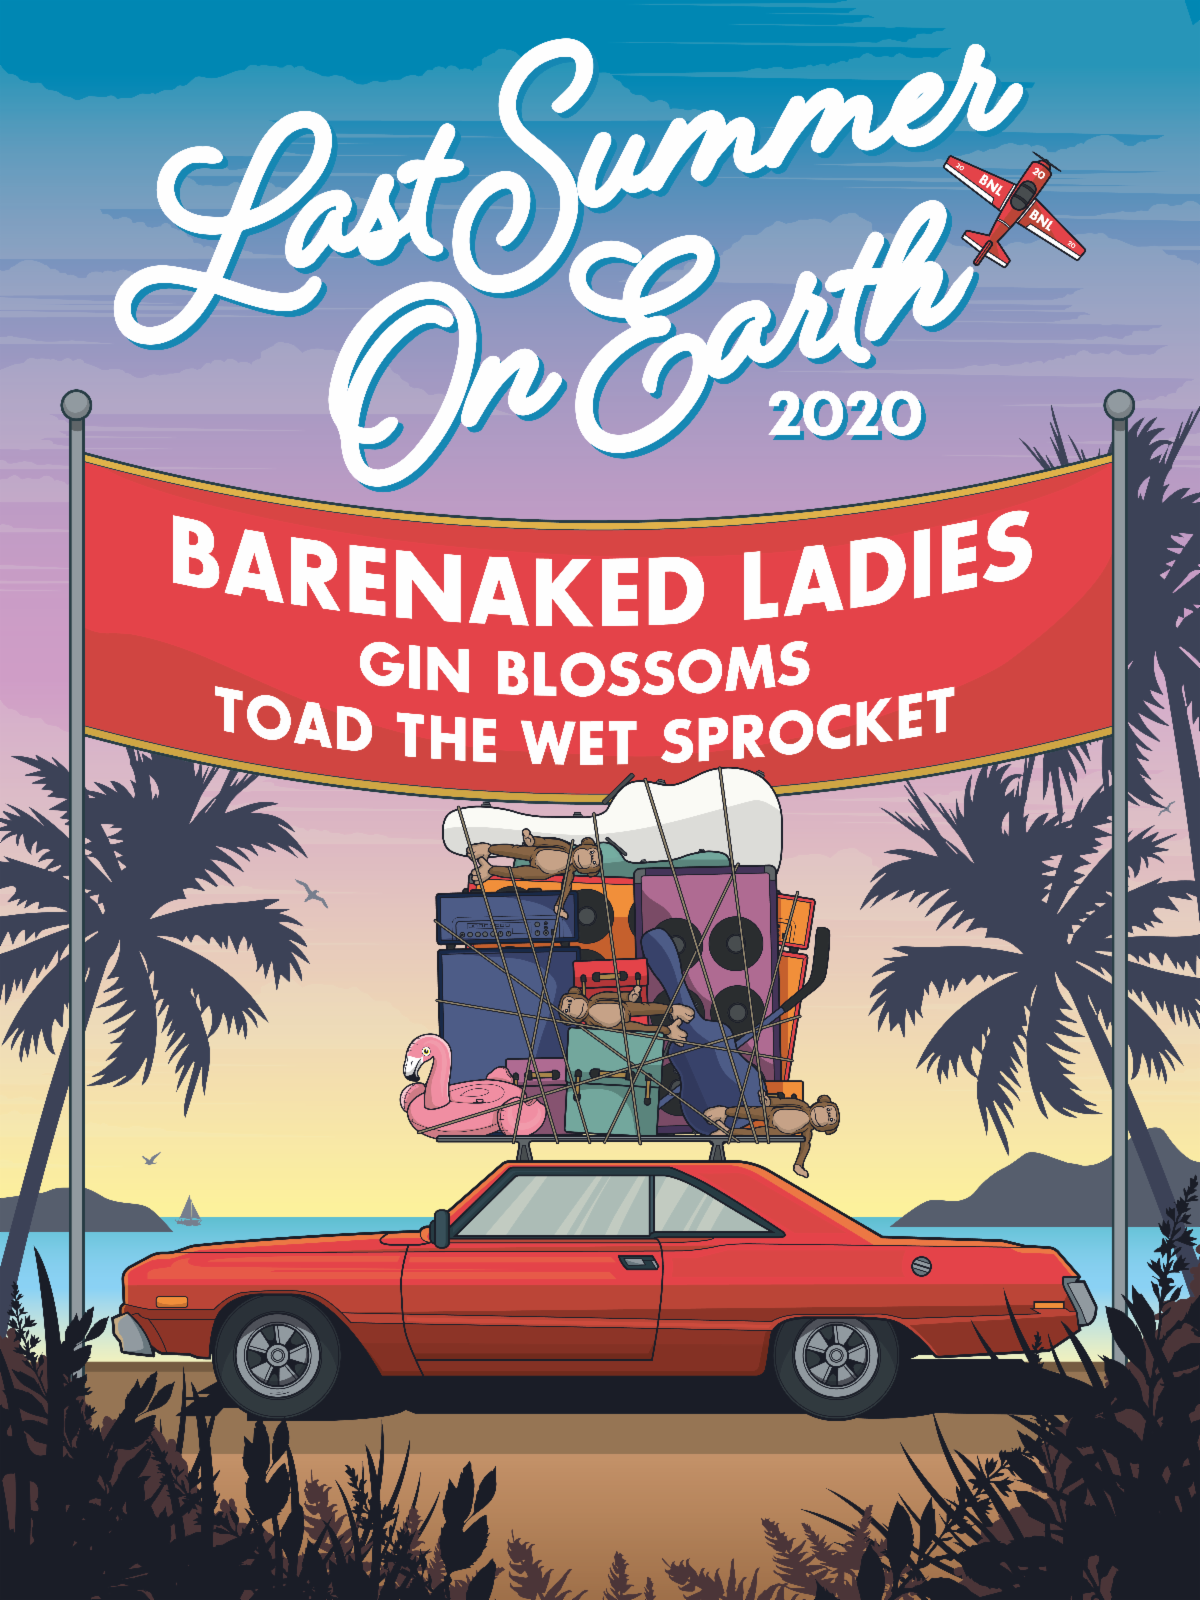 Barenaked Ladies announce 'Last Summer On Earth' tour w. Gin Blossoms & Toad the Wet Sprocket